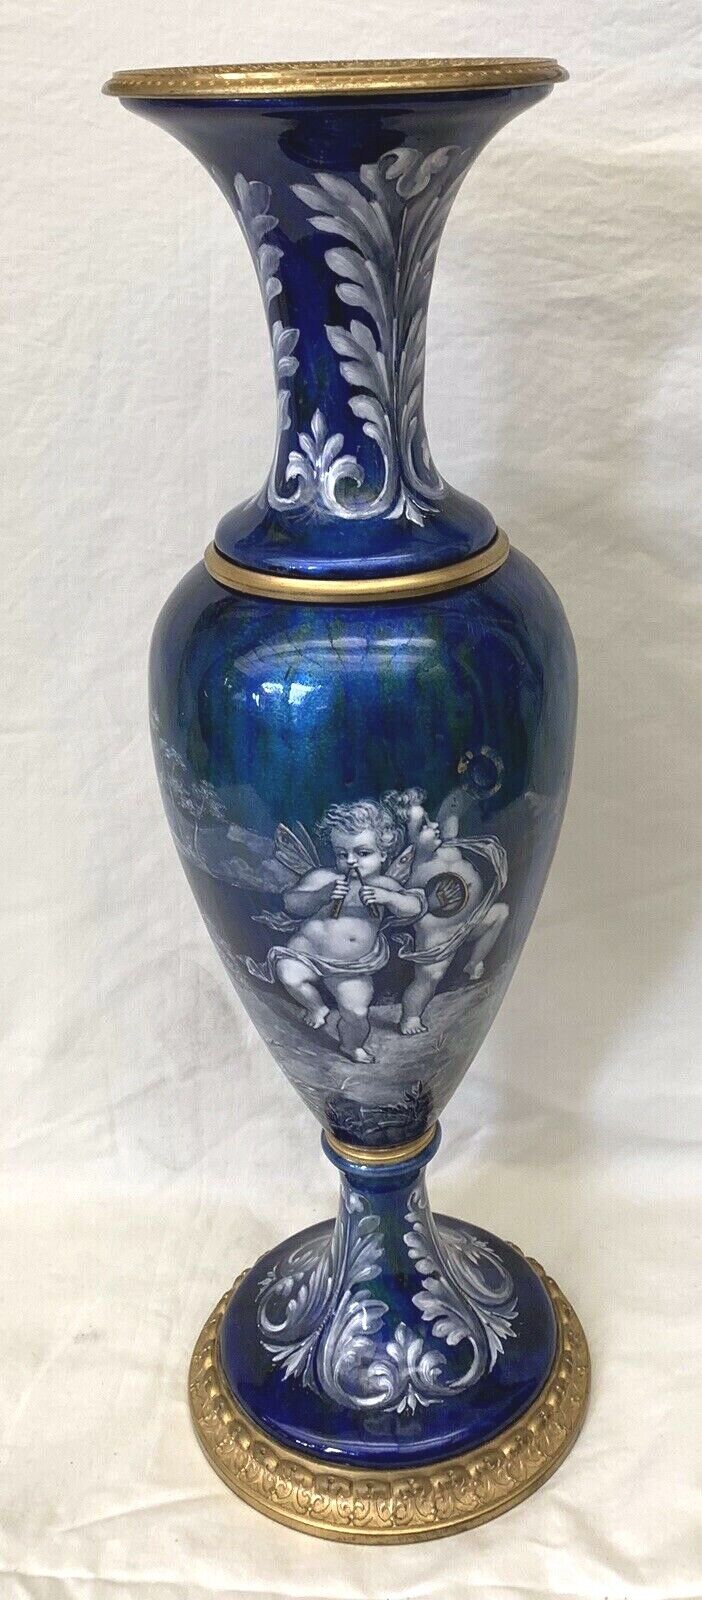 IMPORTANT FRENCH LARGE LIMOGES 19 CENTURY HAND PAINTED ENAMEL CHERUBS PAINTING 